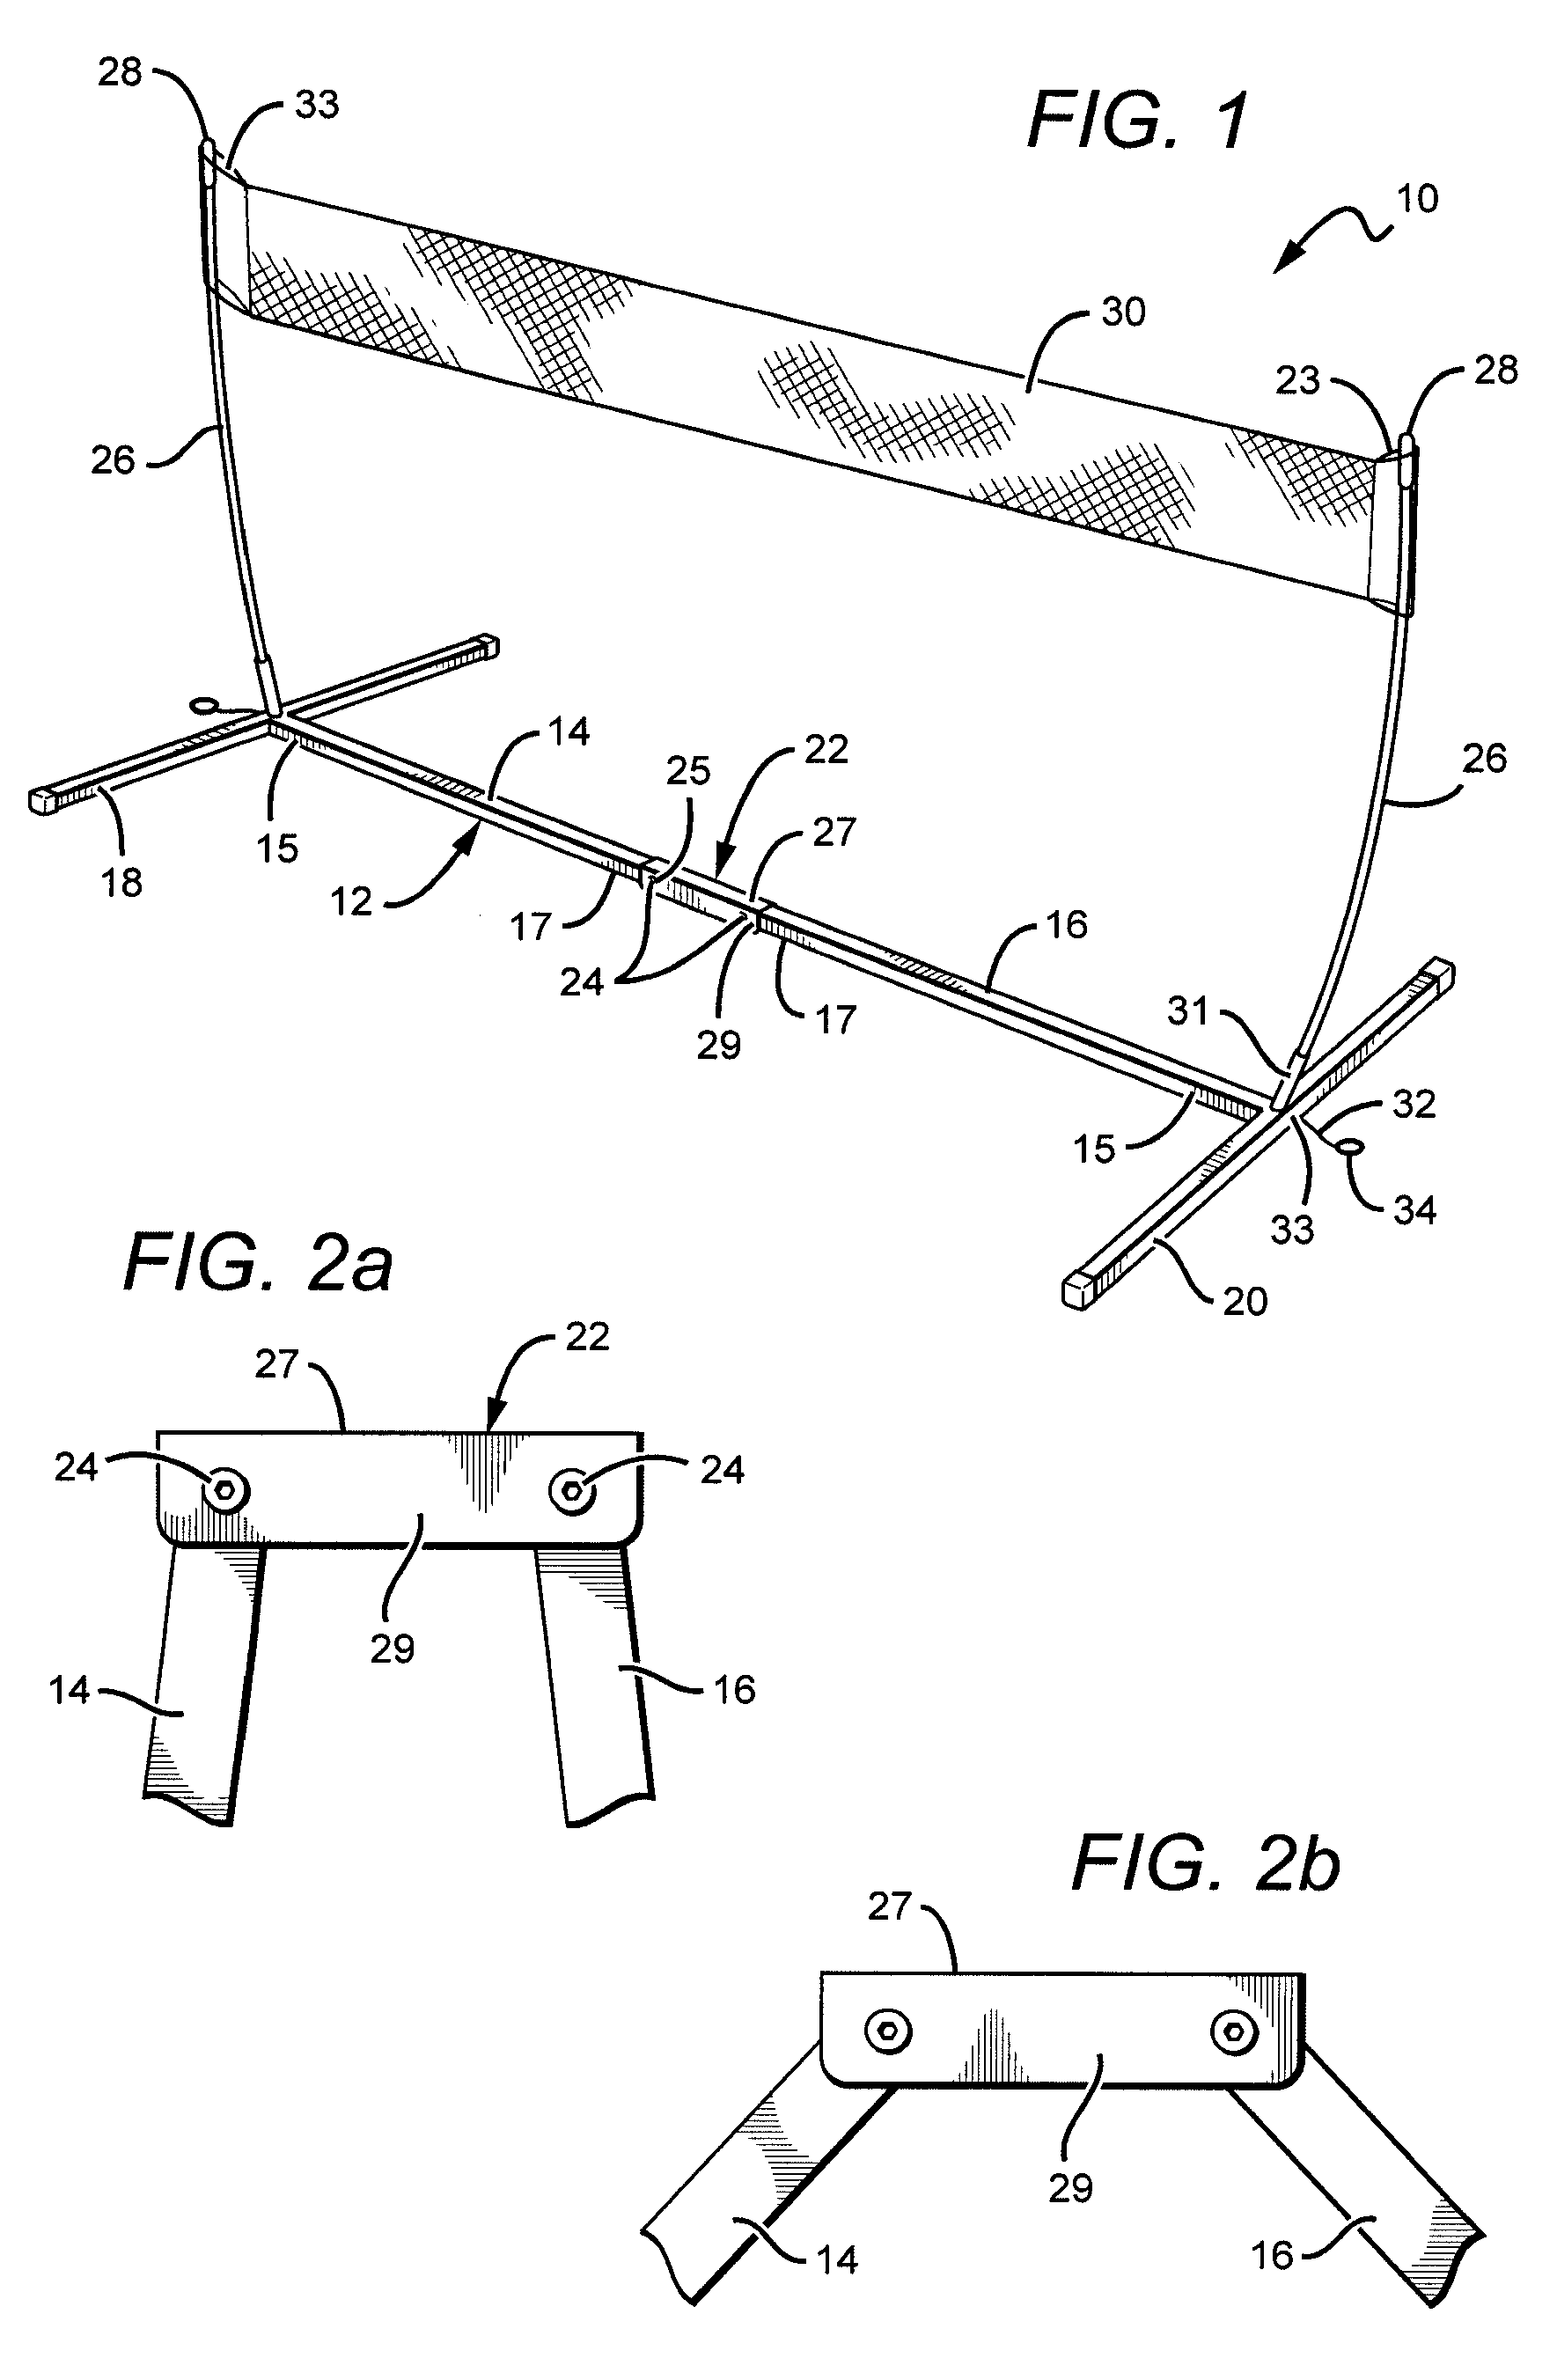 Collapsible and portable sports net apparatus